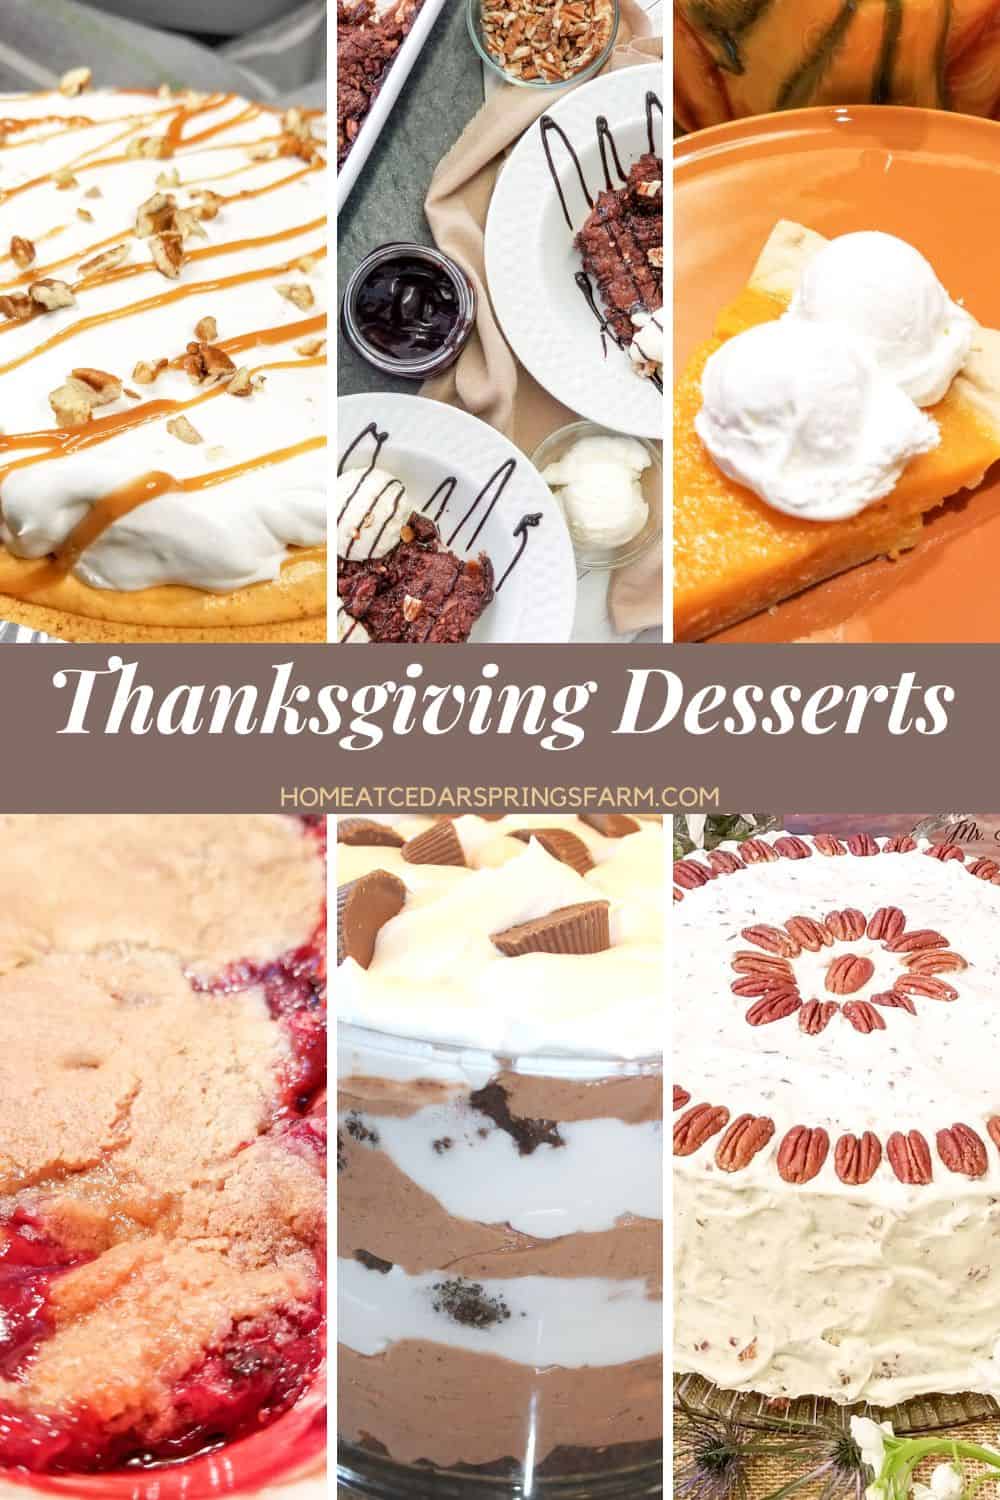 Pictures of Thanksgiving Desserts with text overlay.